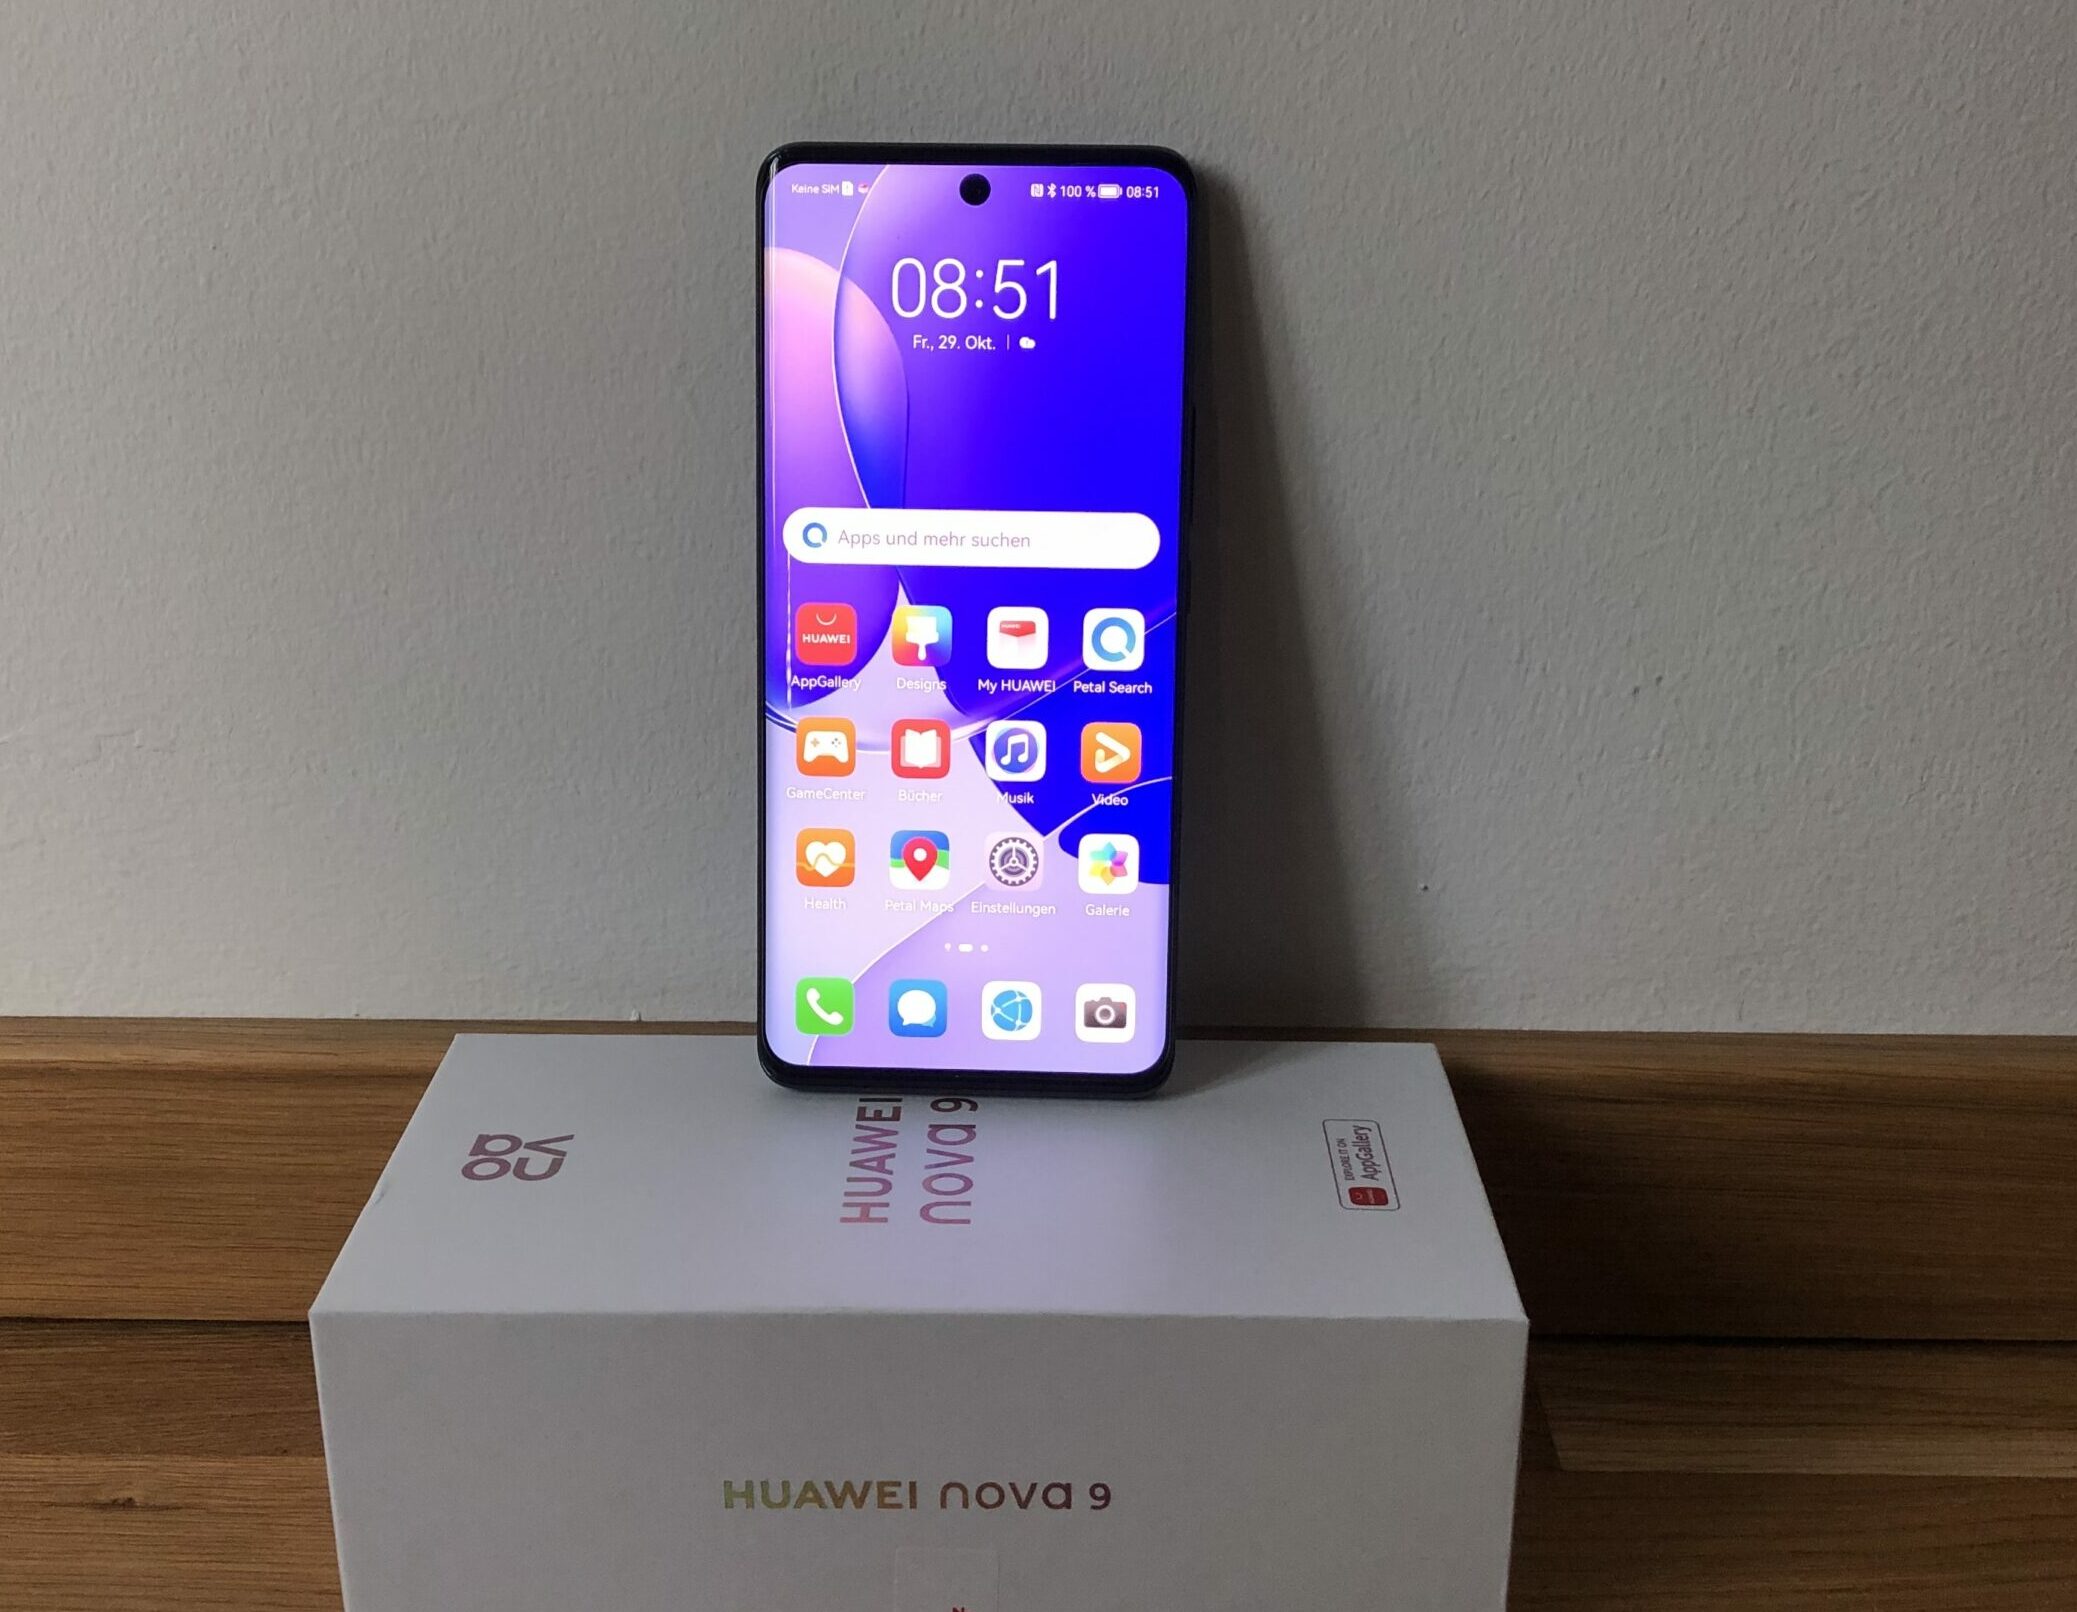 Huawei P20 Lite review: Posh midrange smartphone with great